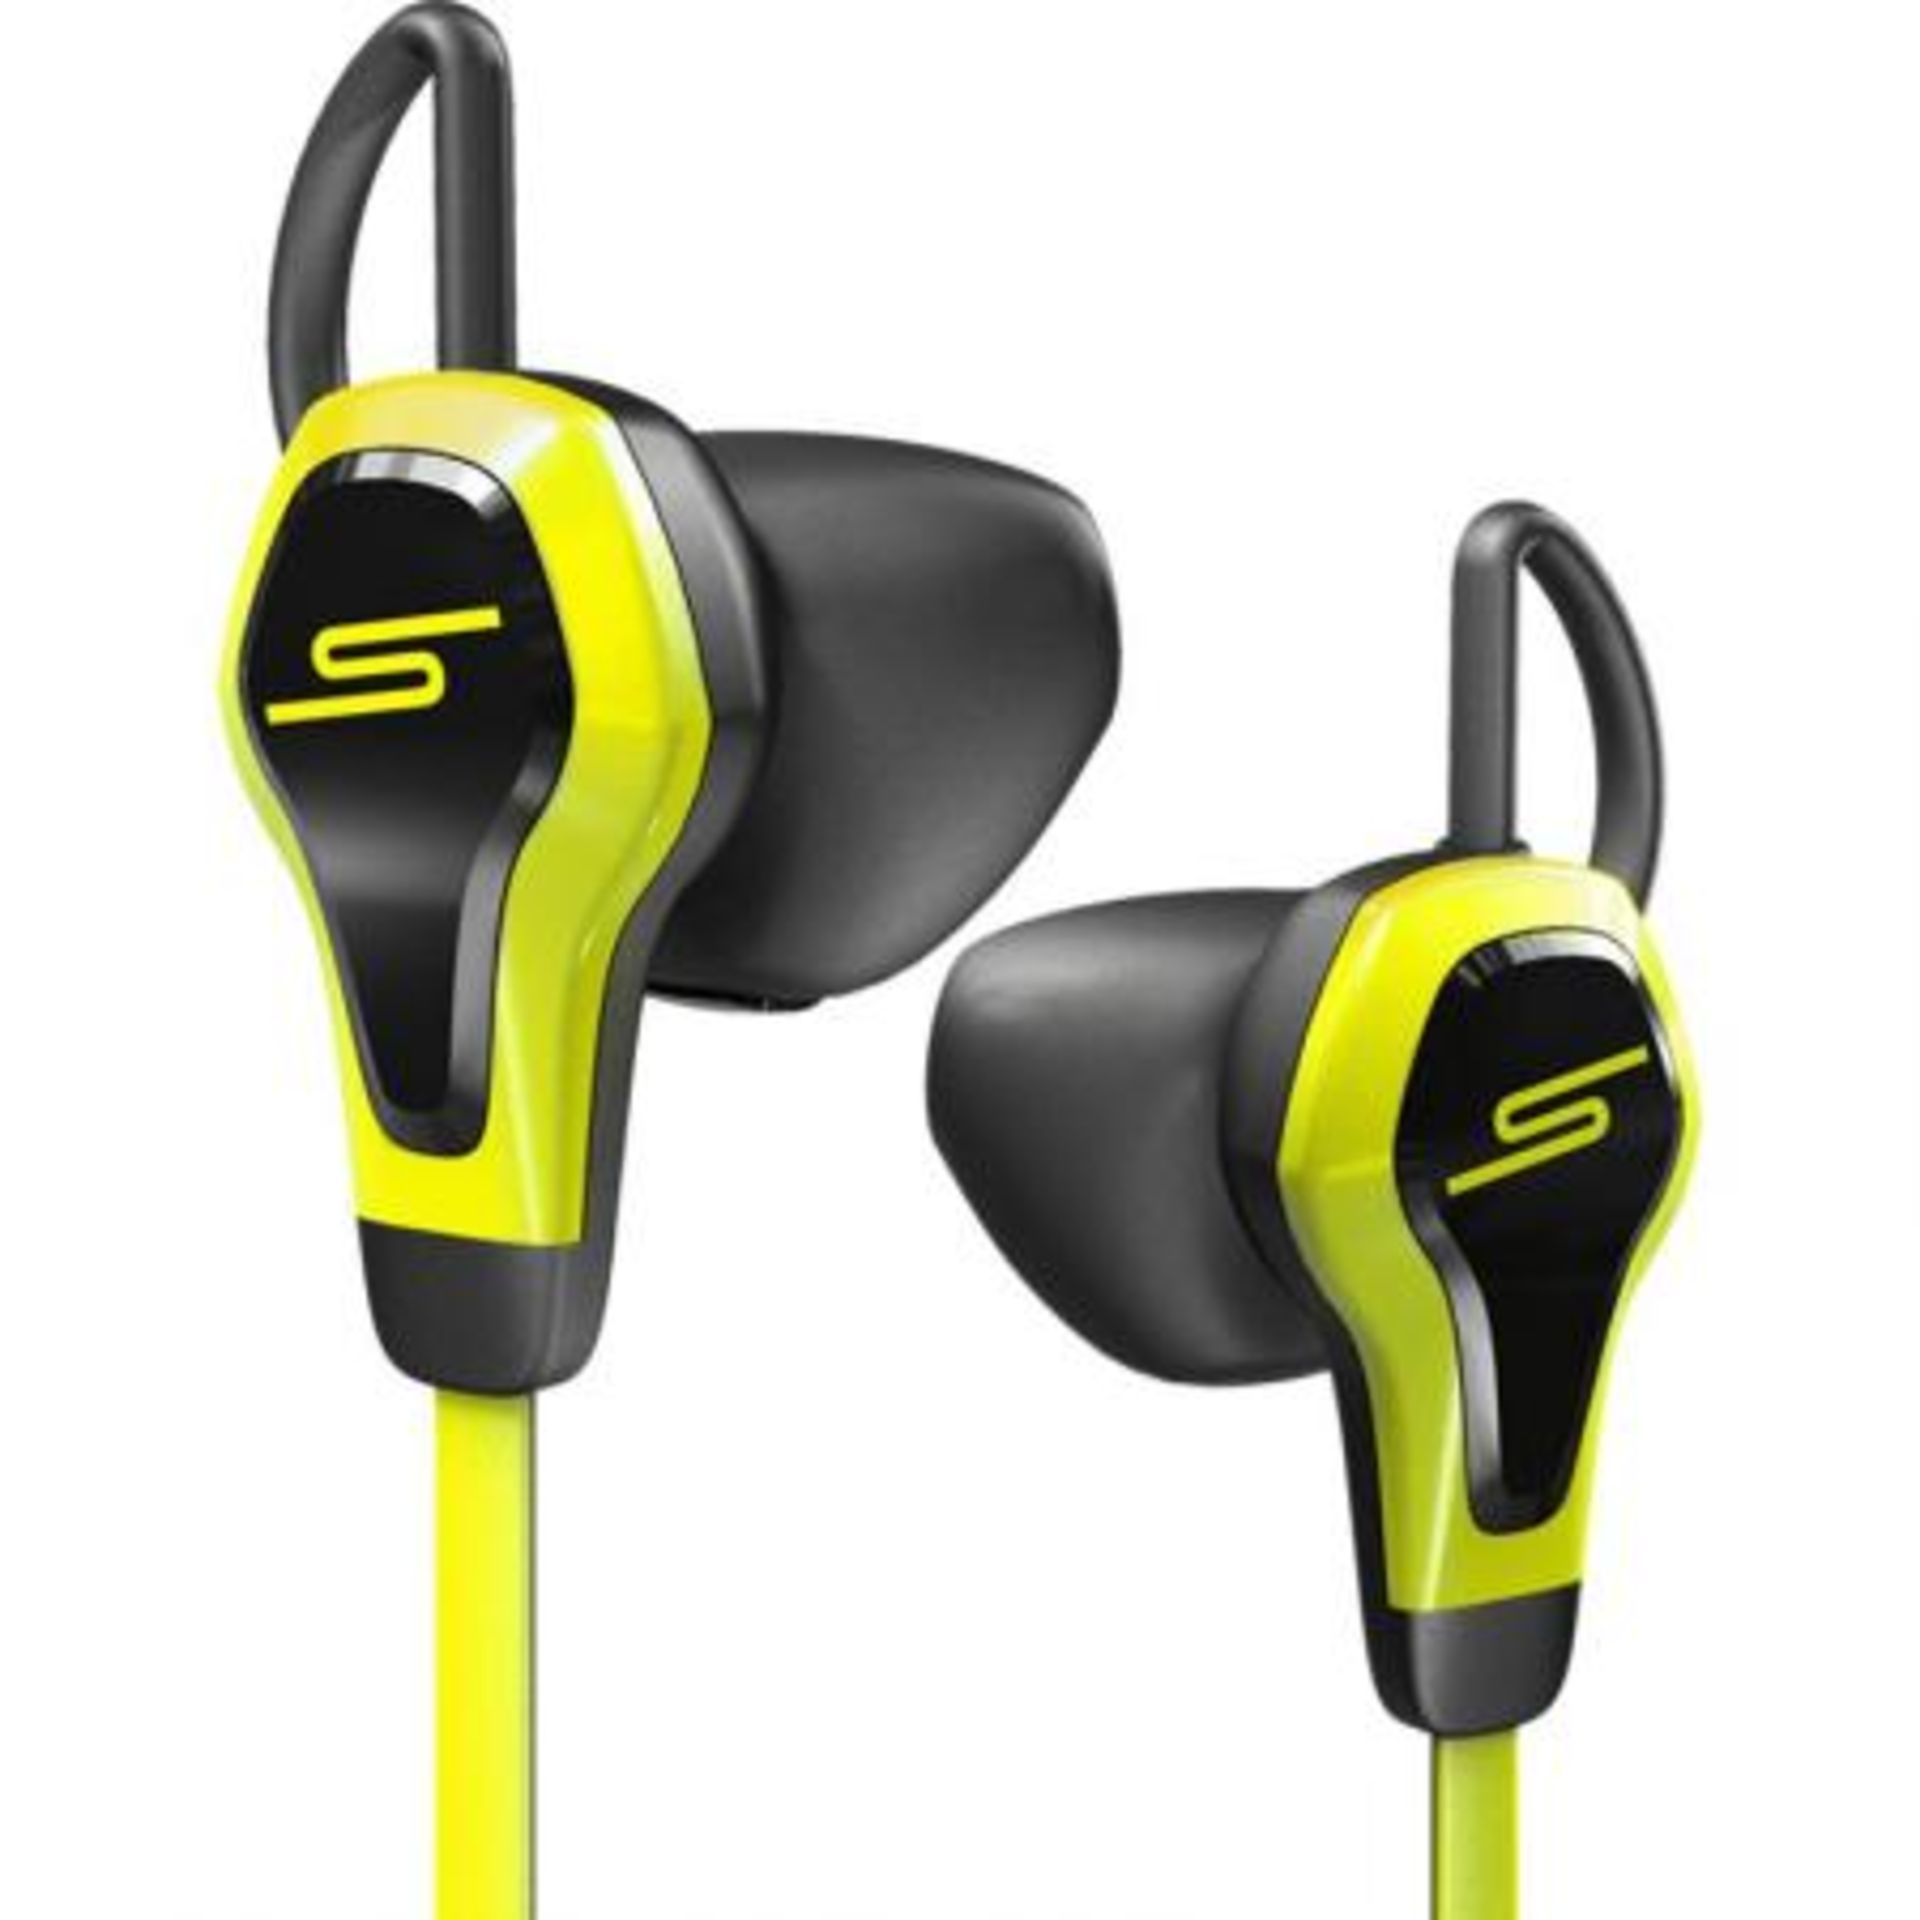 V Brand New SMS Audio BioSport Earphones - RRP £149.99 - Heart Rate Monitor Measures Changes In - Image 2 of 5